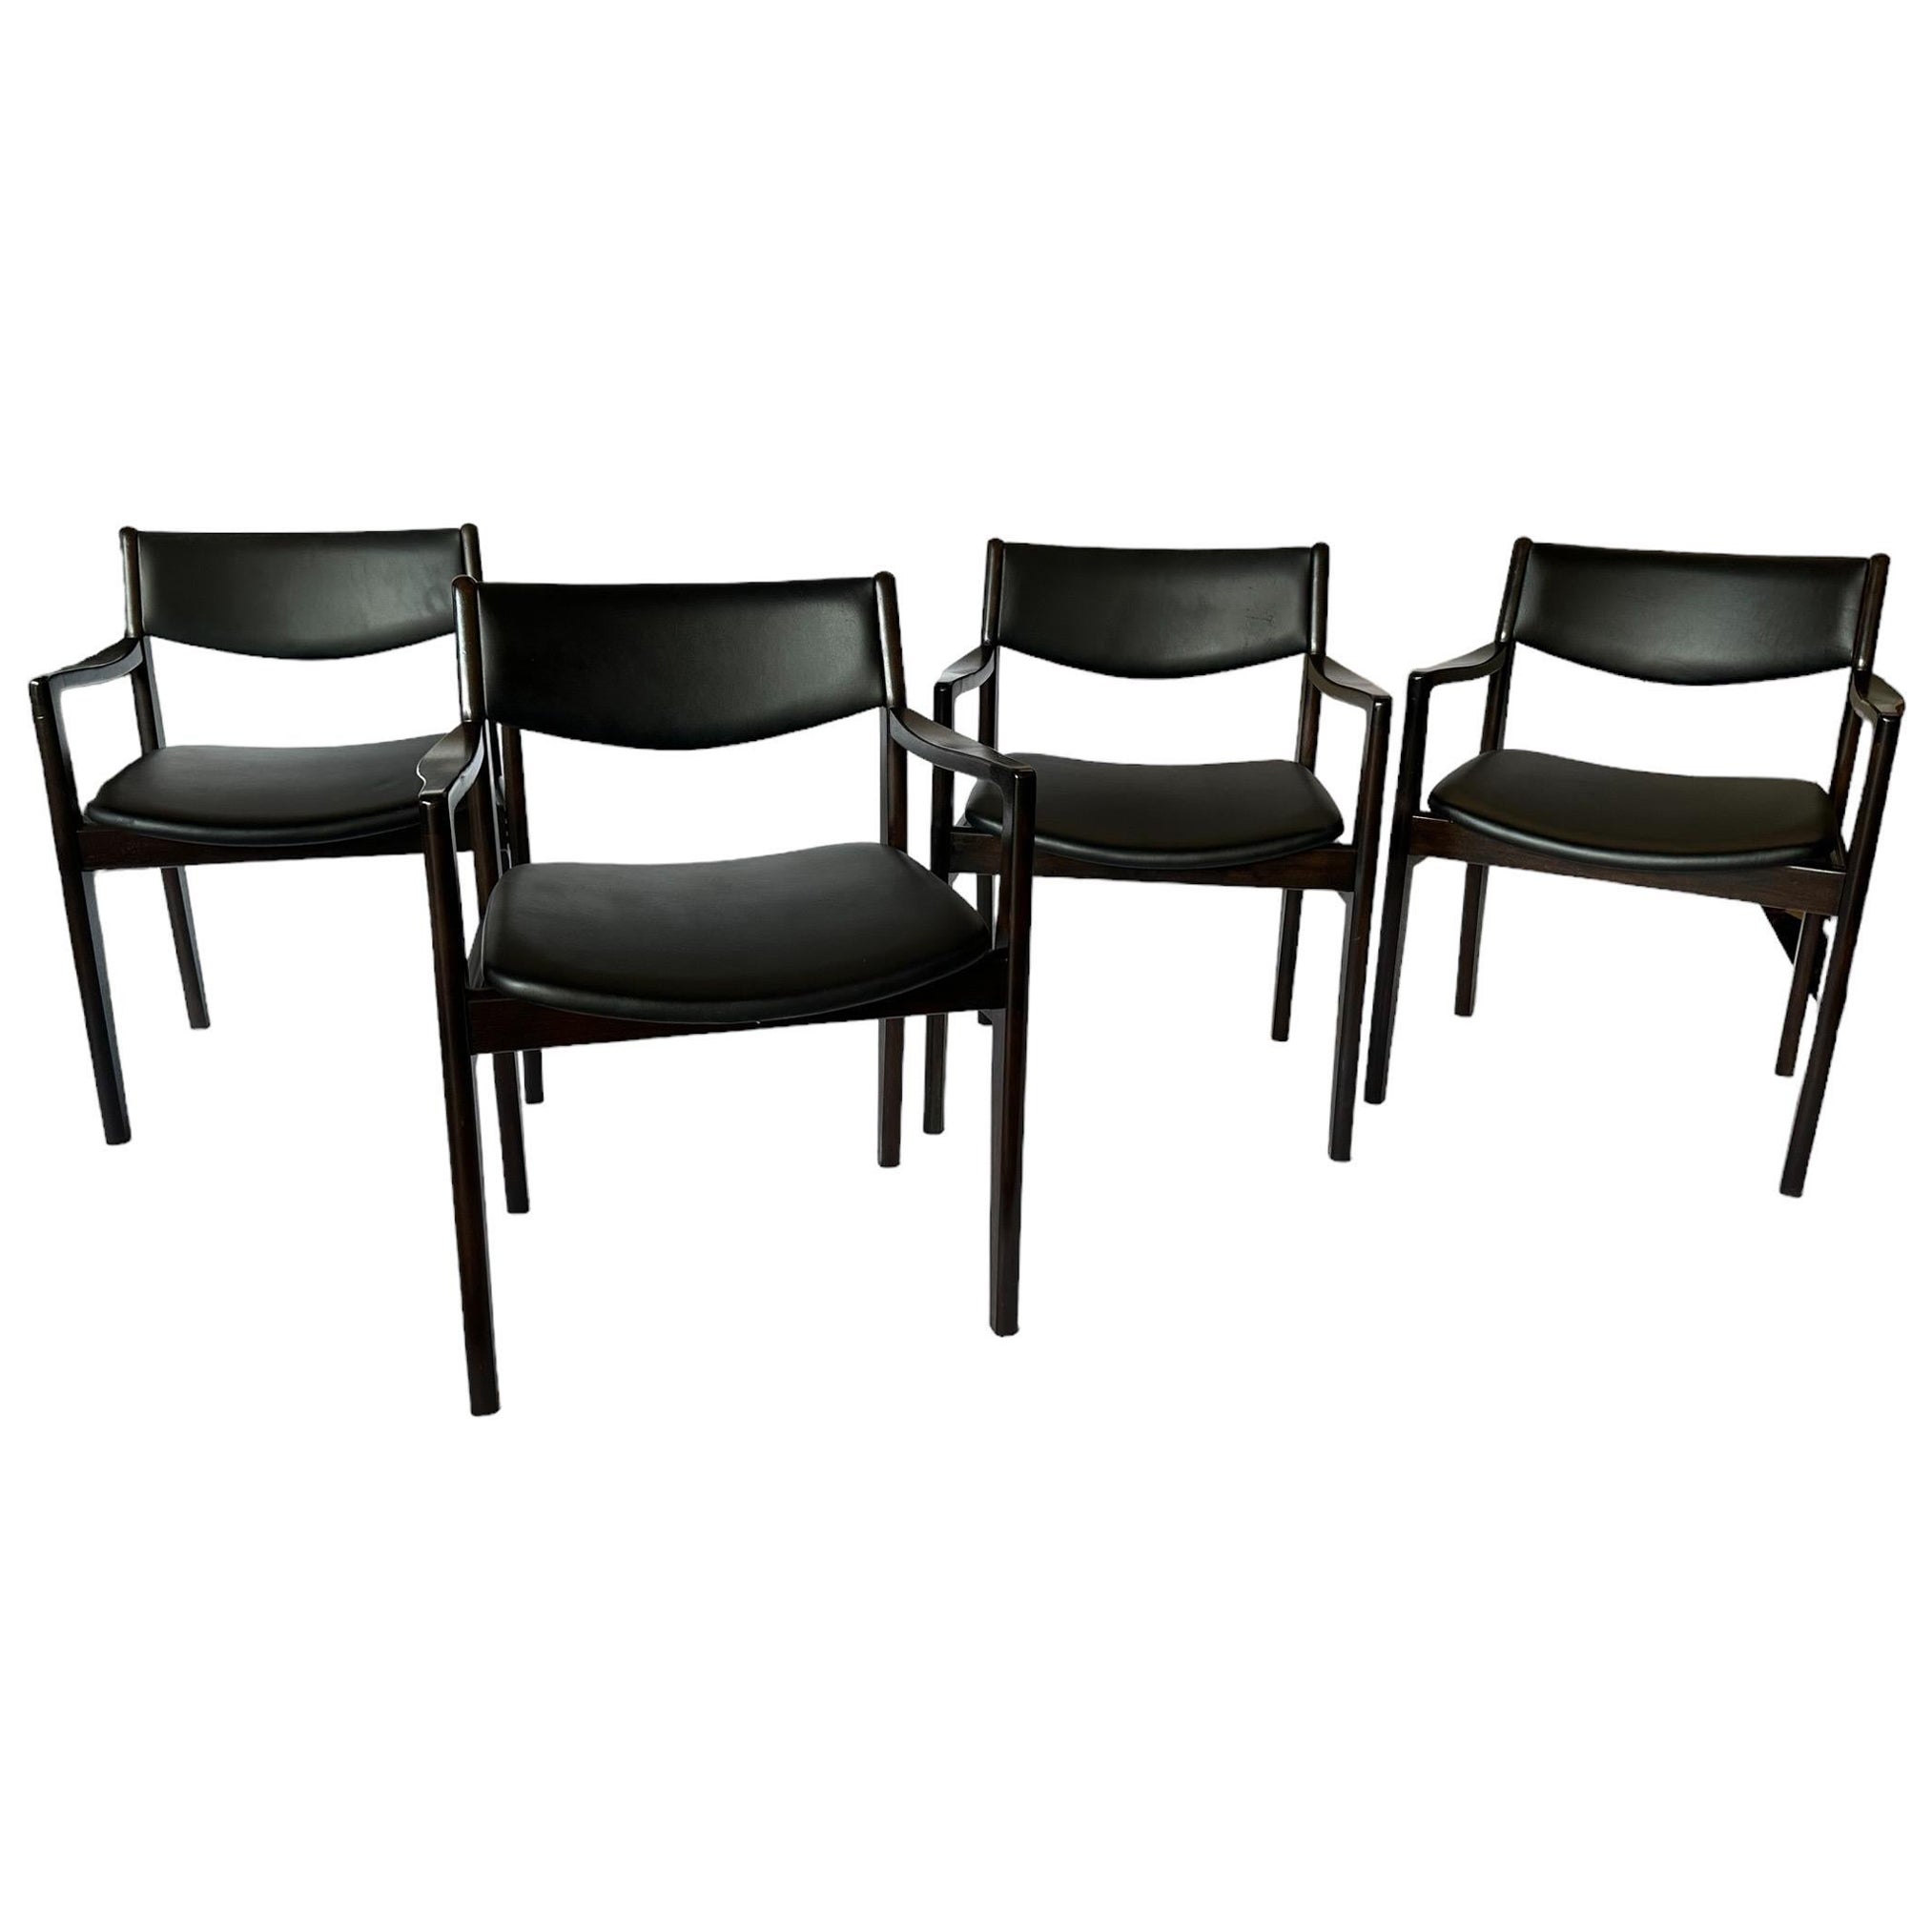 Set of 4 Midcentury Modern Danish Style Hardwood Dining Chairs For Sale